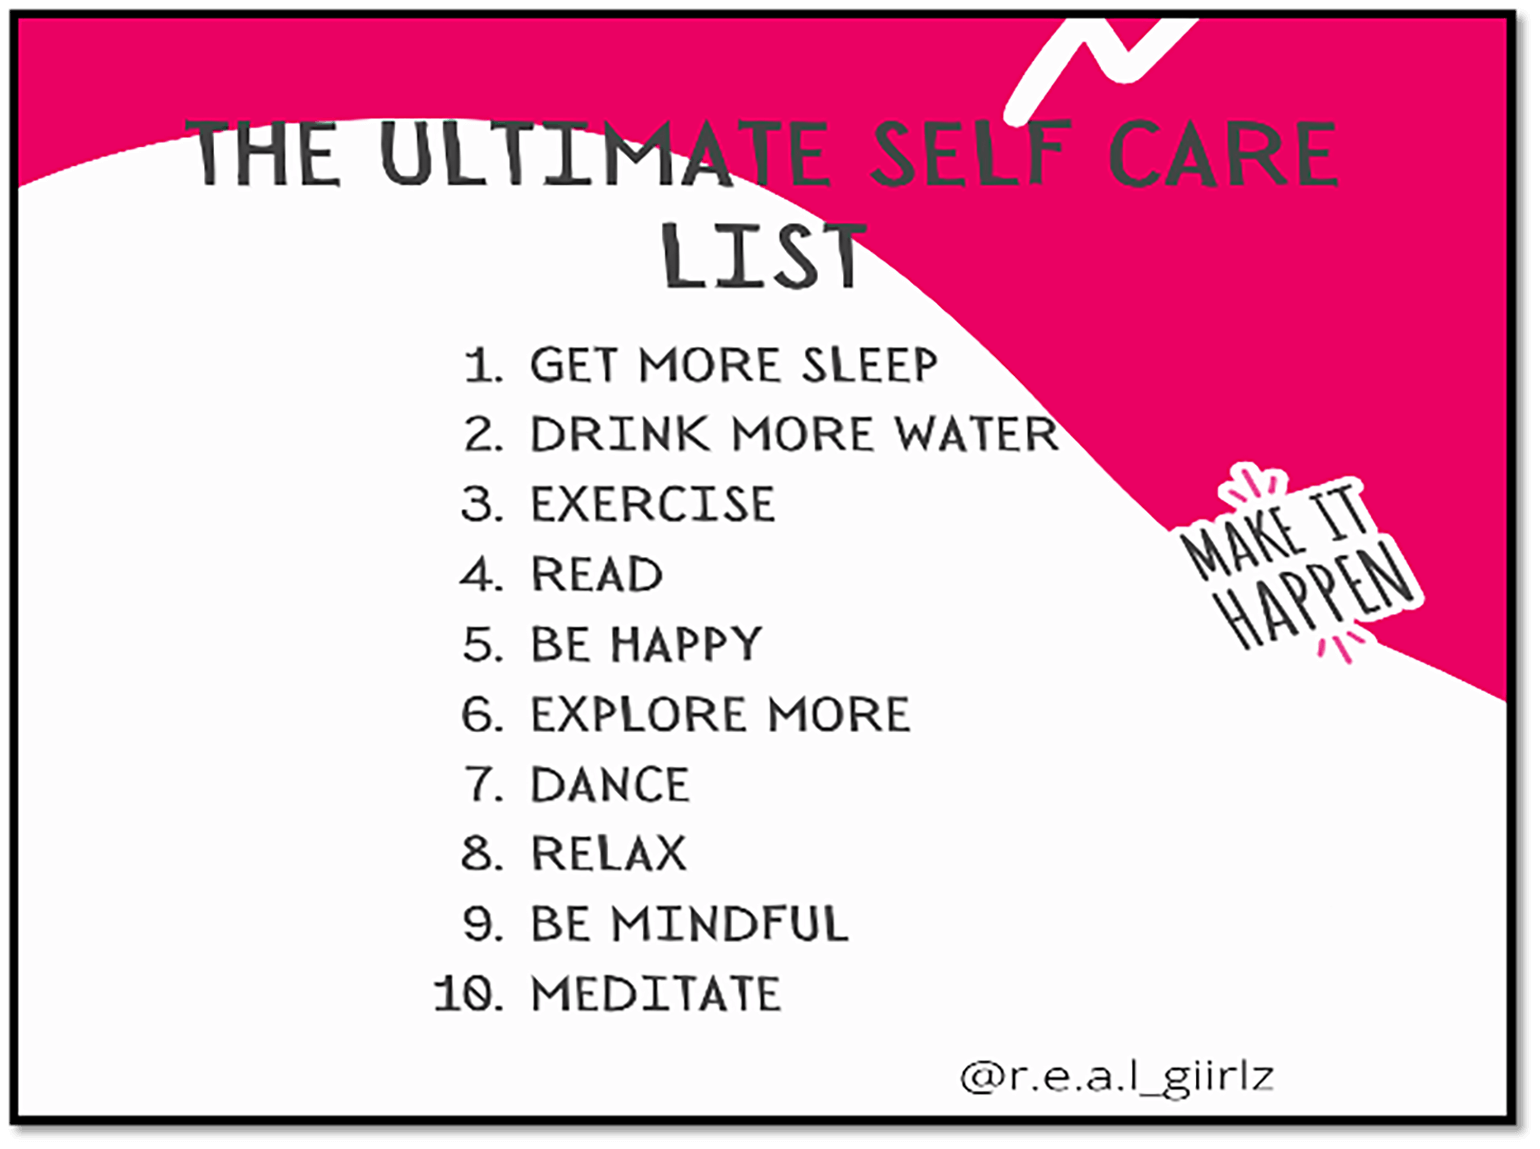 Picture with 10 self-care tips.